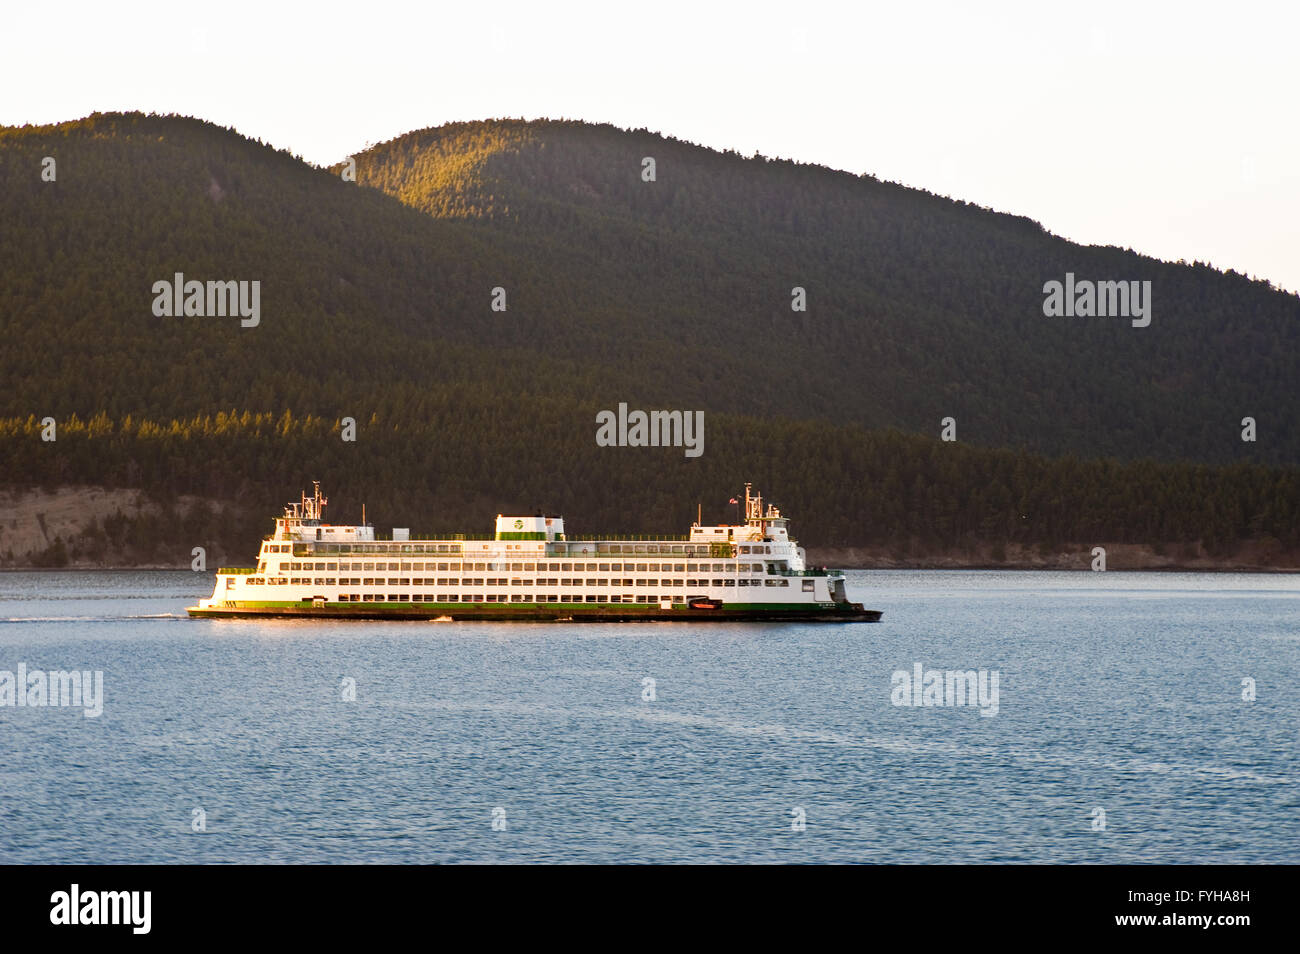 WA state ferry from the San Juan islands to Anacortes Stock Photo